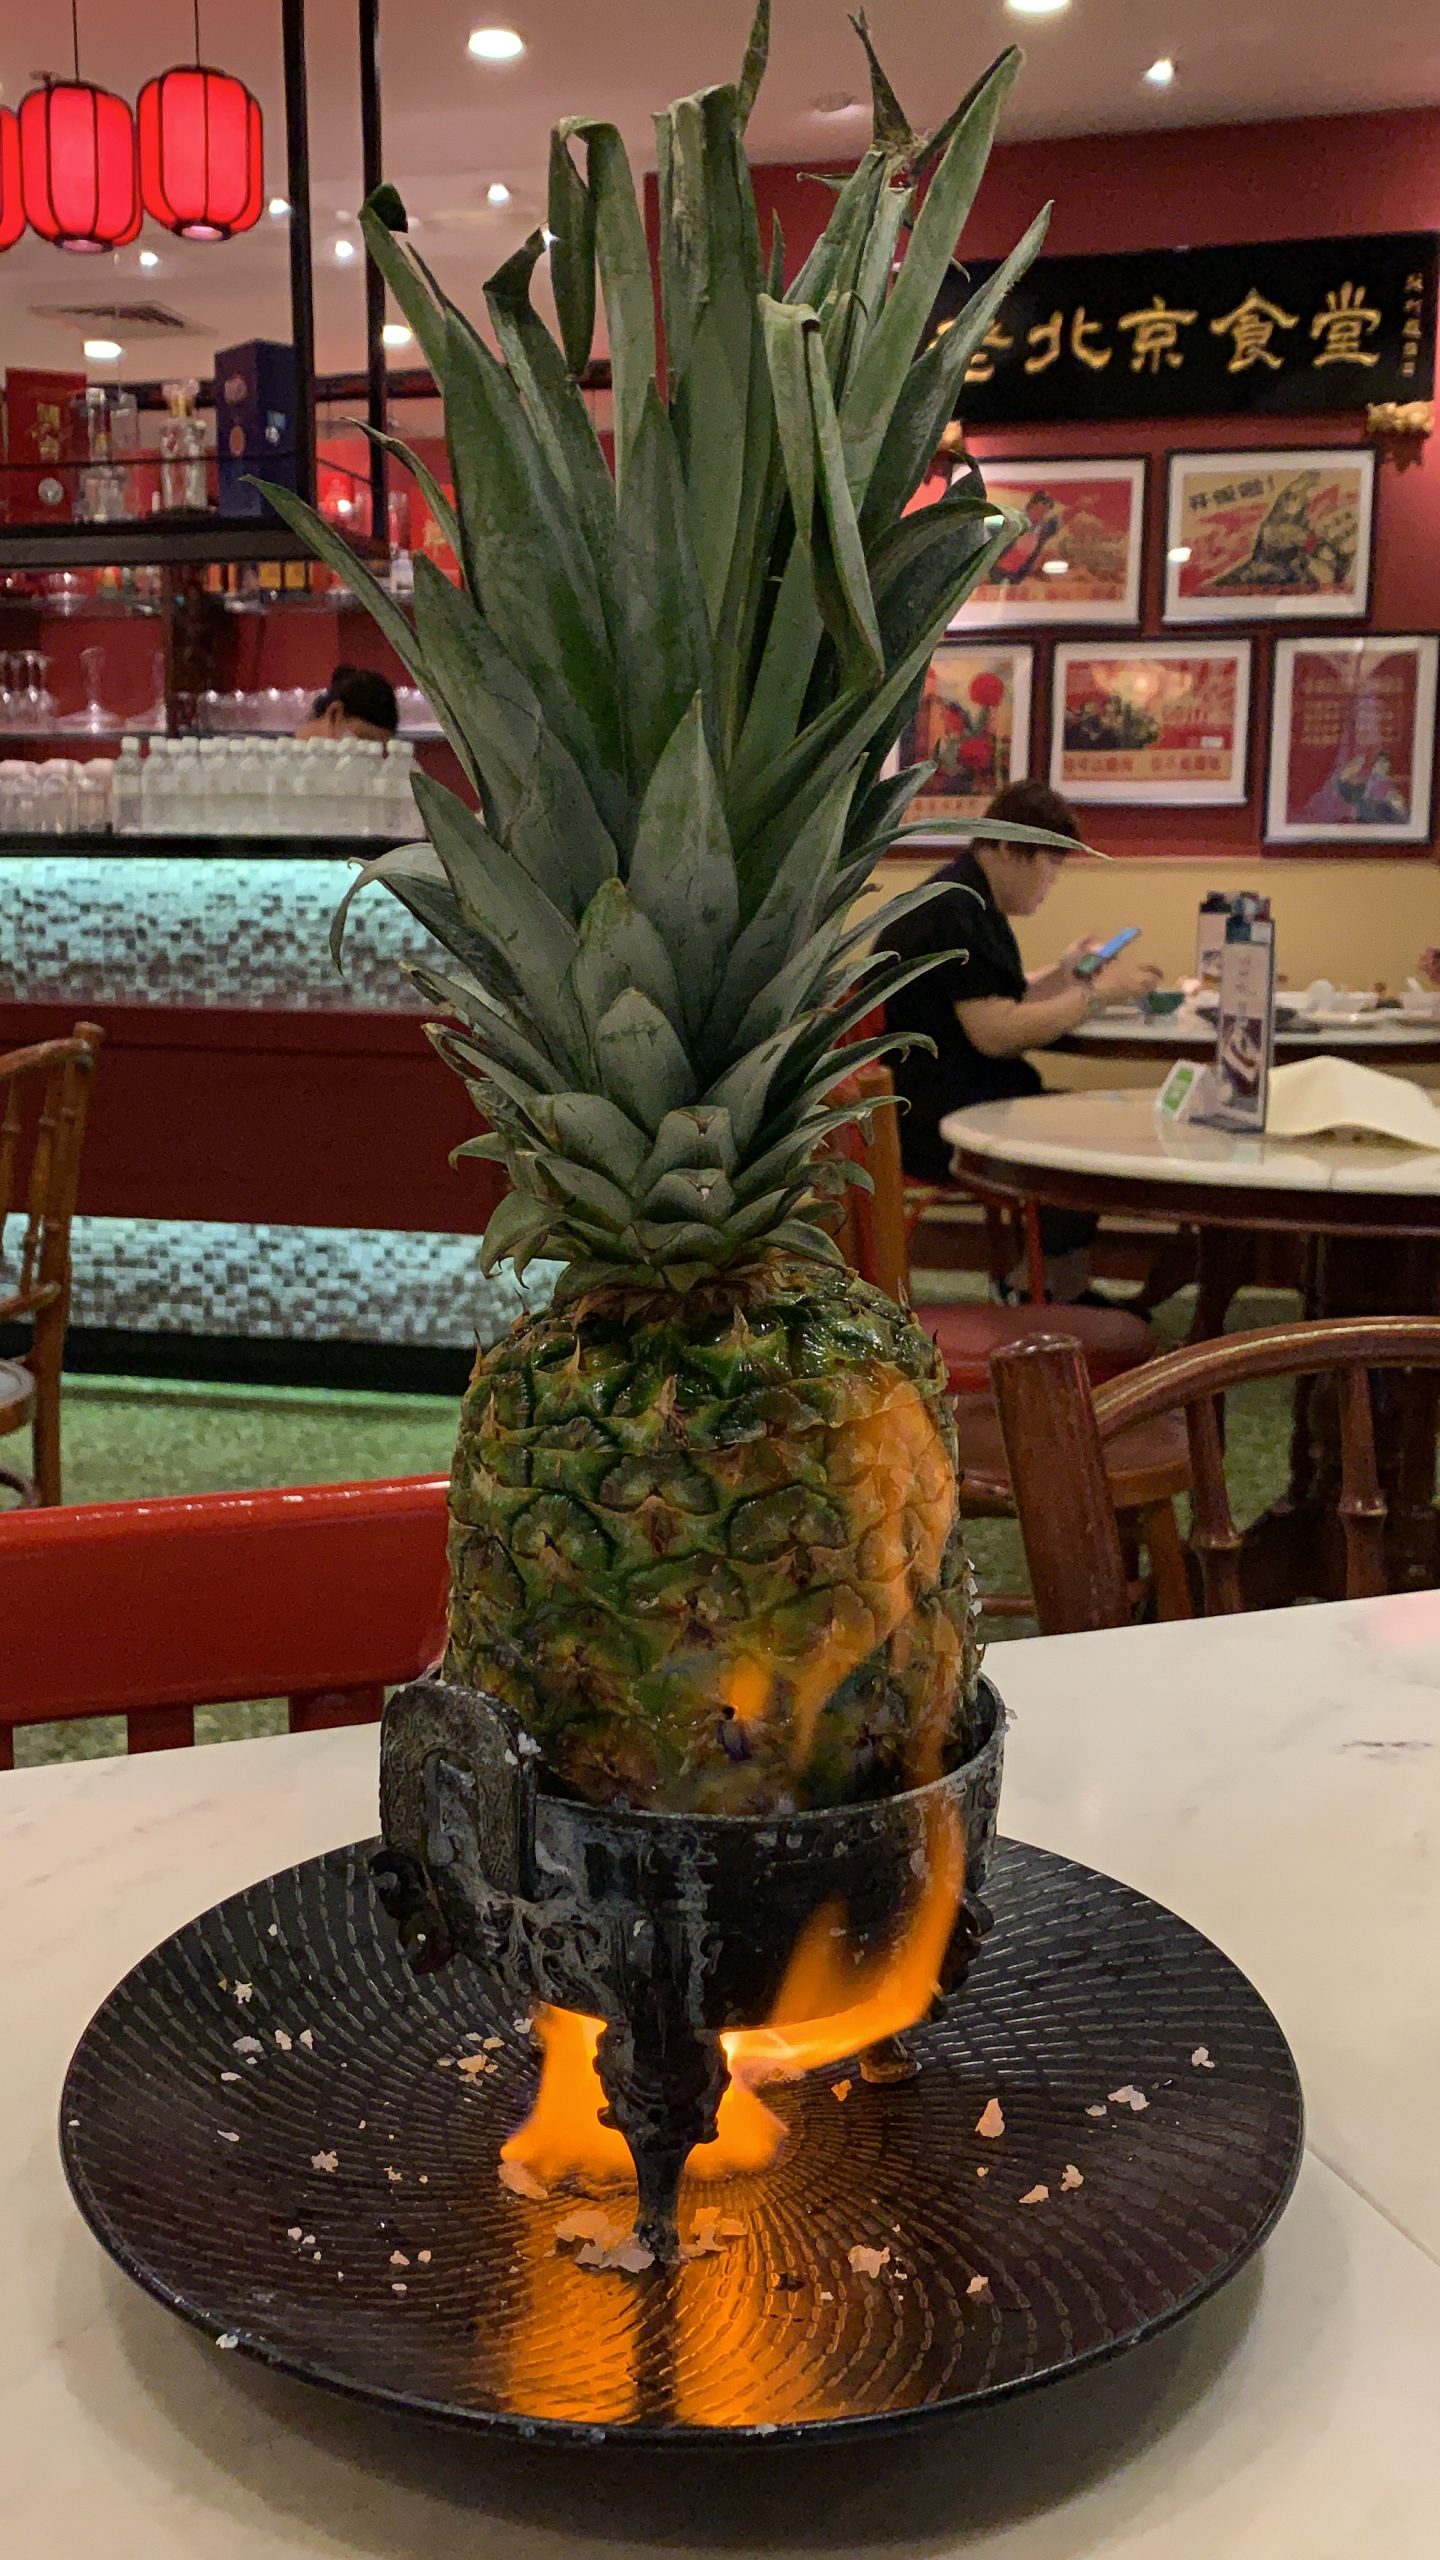 Lao Beijing - Awesome Flaming Pineapple Beef